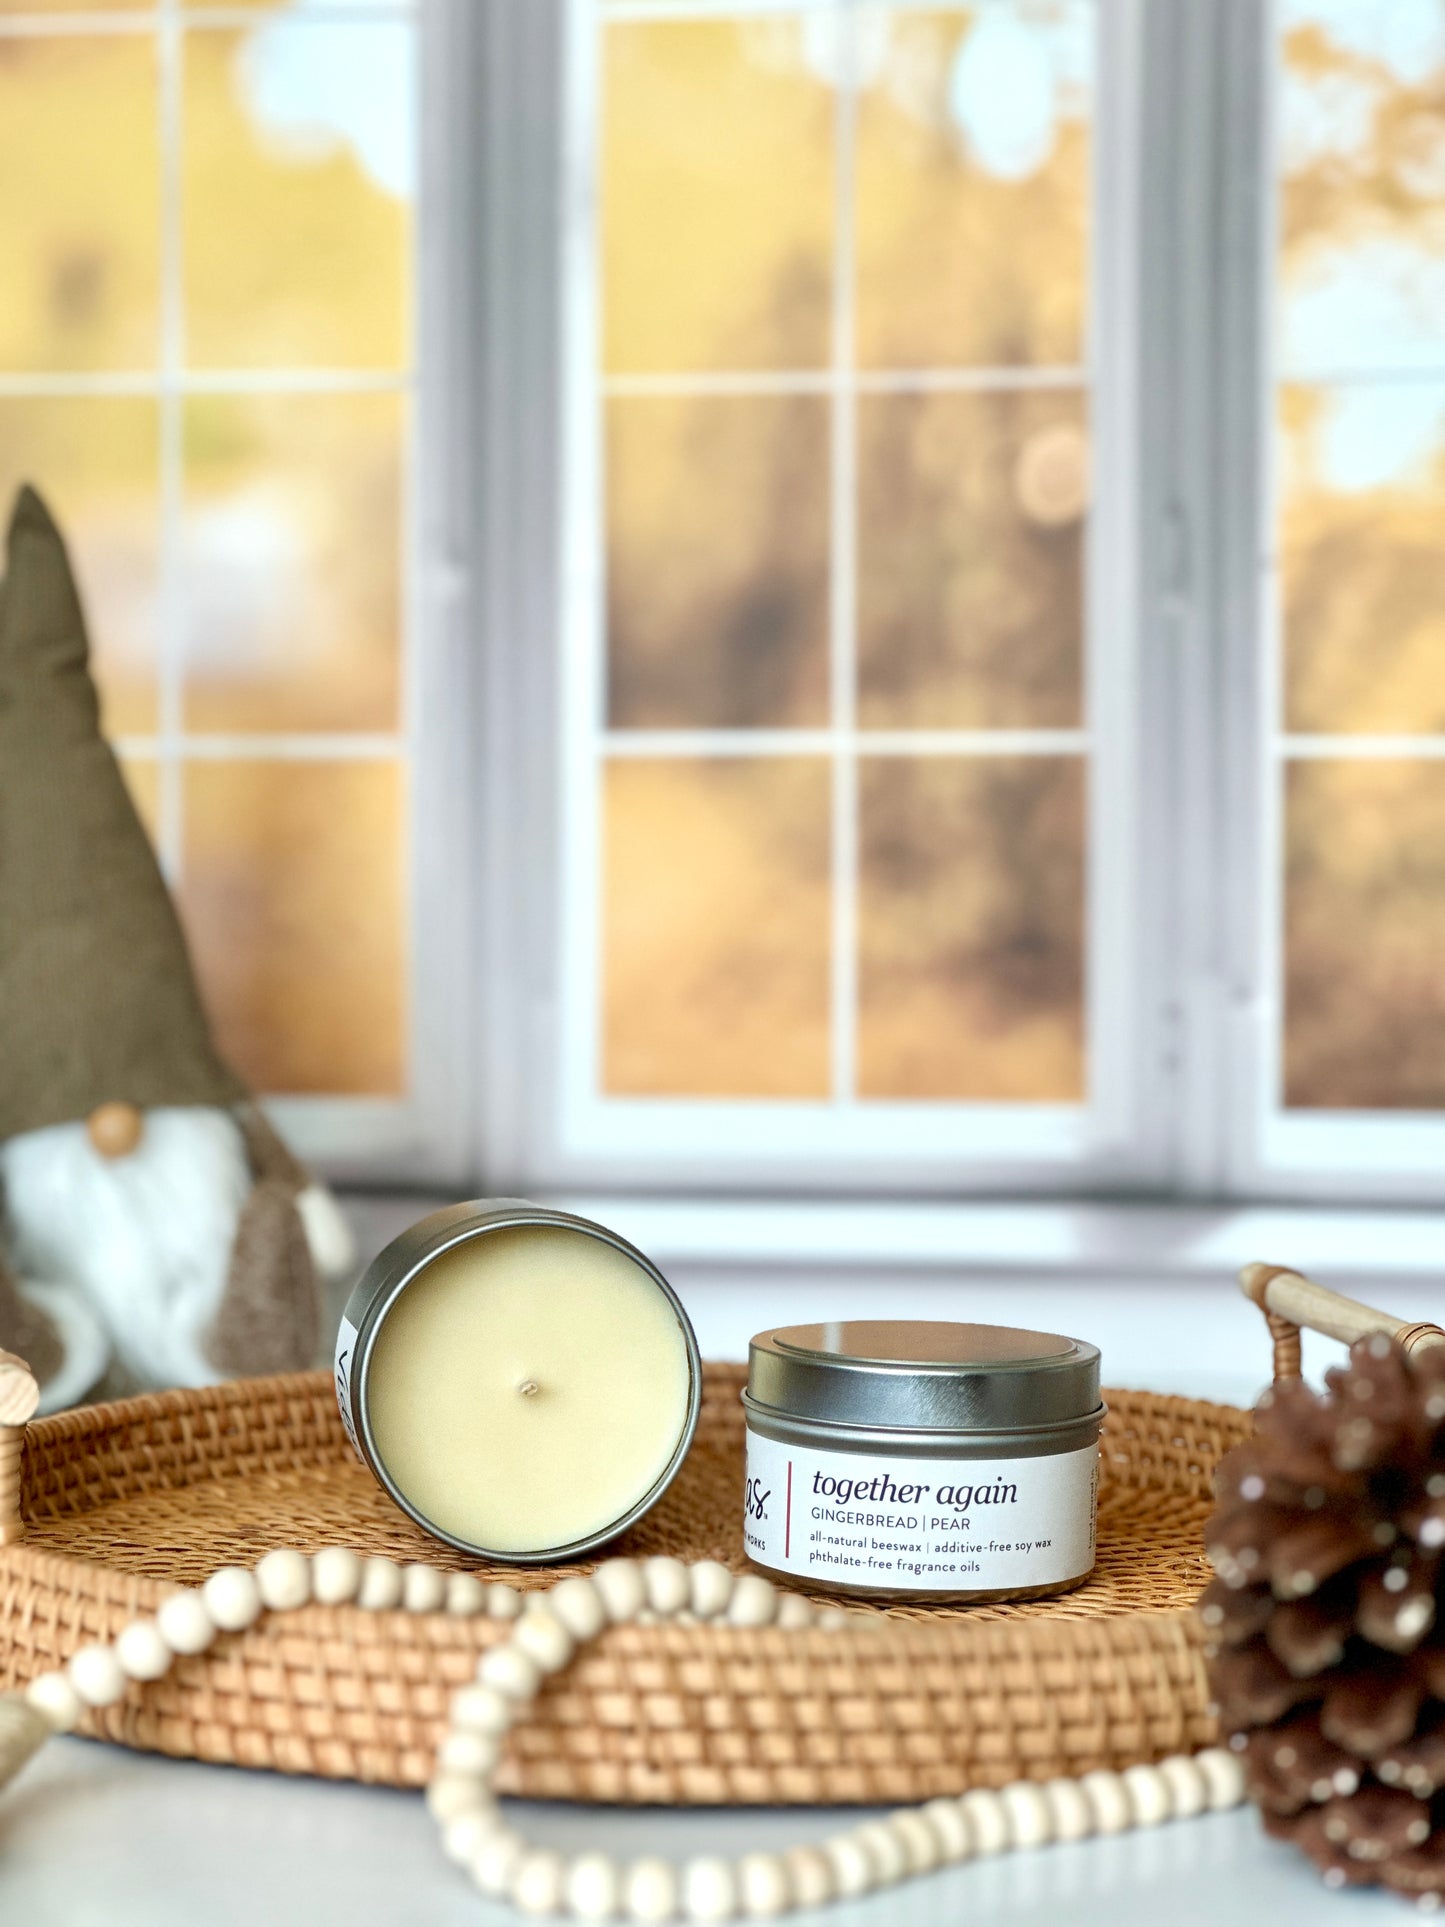 Captivating fall fragrance: Gingerbread and pear. An open 3.5oz travel candle tin reveals its natural blend of beeswax and soy wax on a wicker serving tray, next to an unopened tin. A string of beads and a pinecone grace the foreground, while a whimsical brown gnome adds charm against the backdrop of blurred yellow fall leaves outside a window.